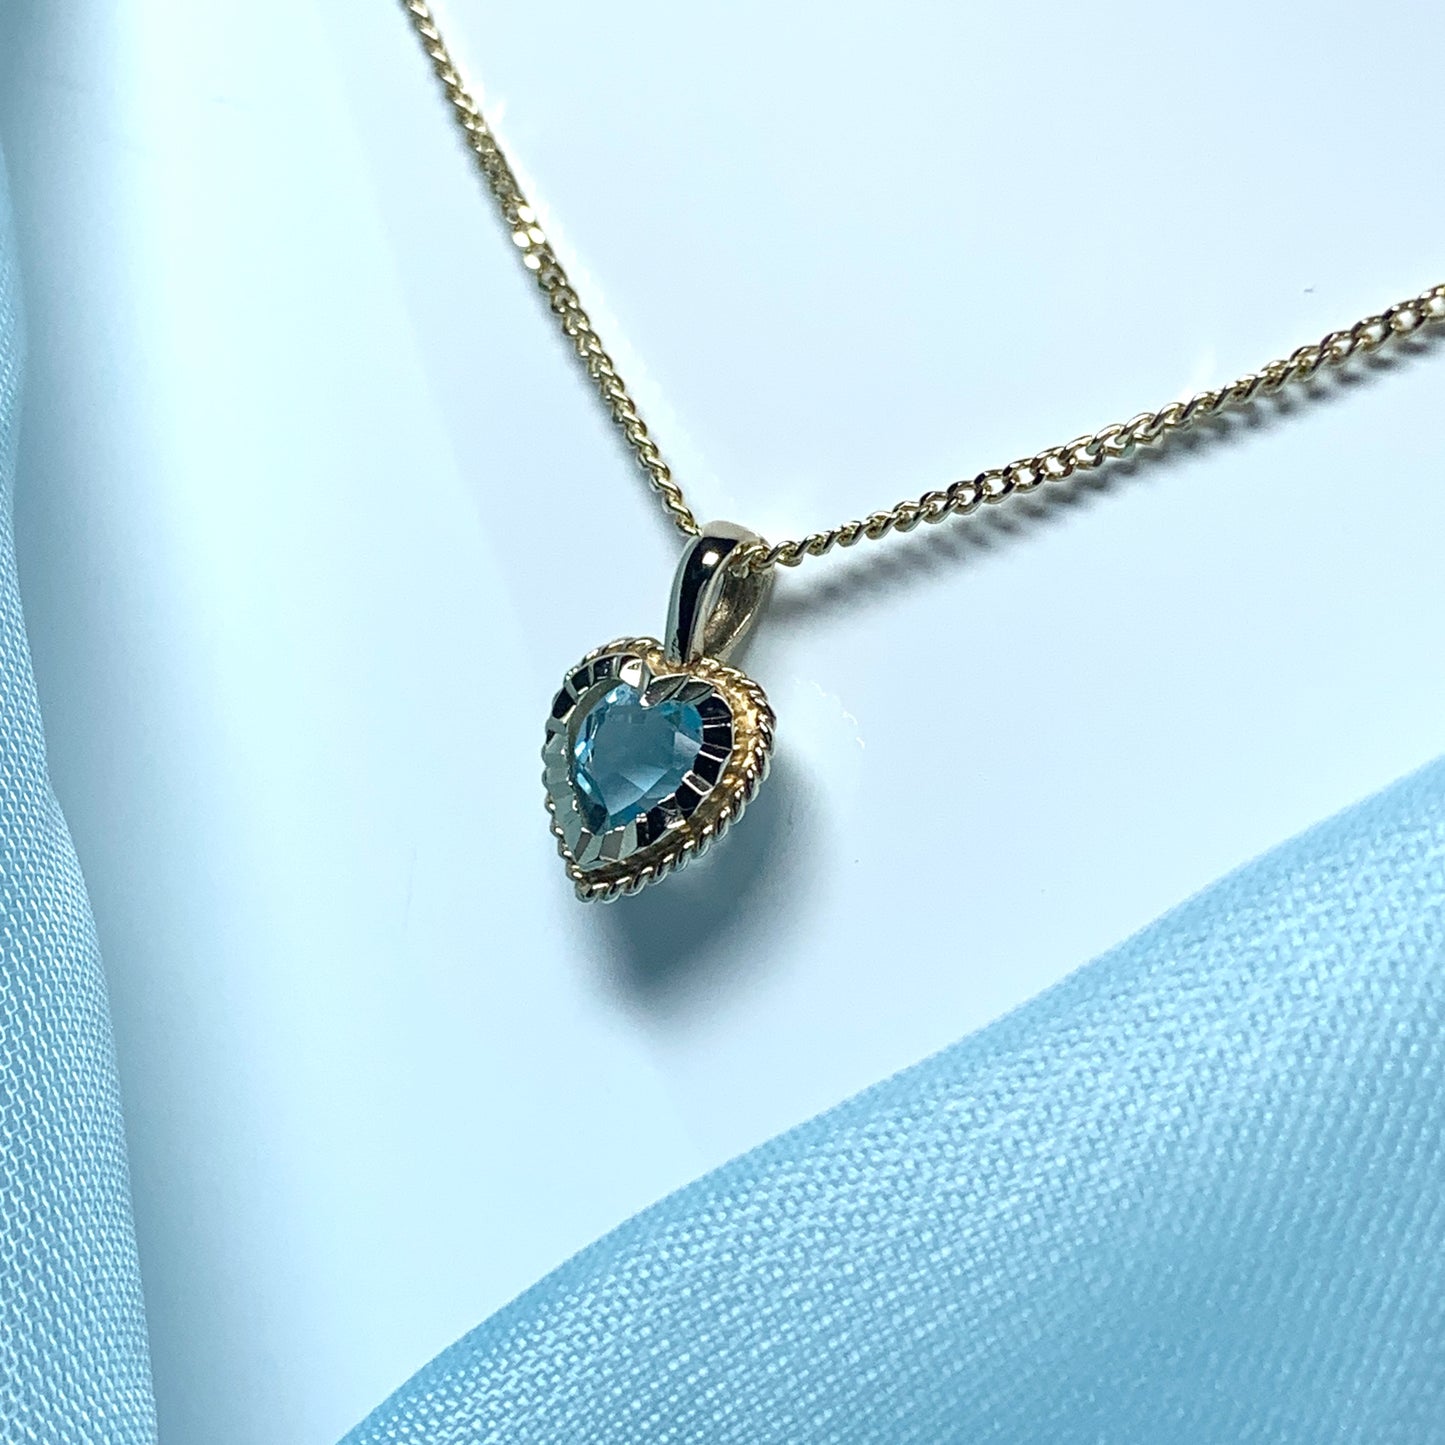 Blue Topaz necklace yellow gold heart shaped pendant